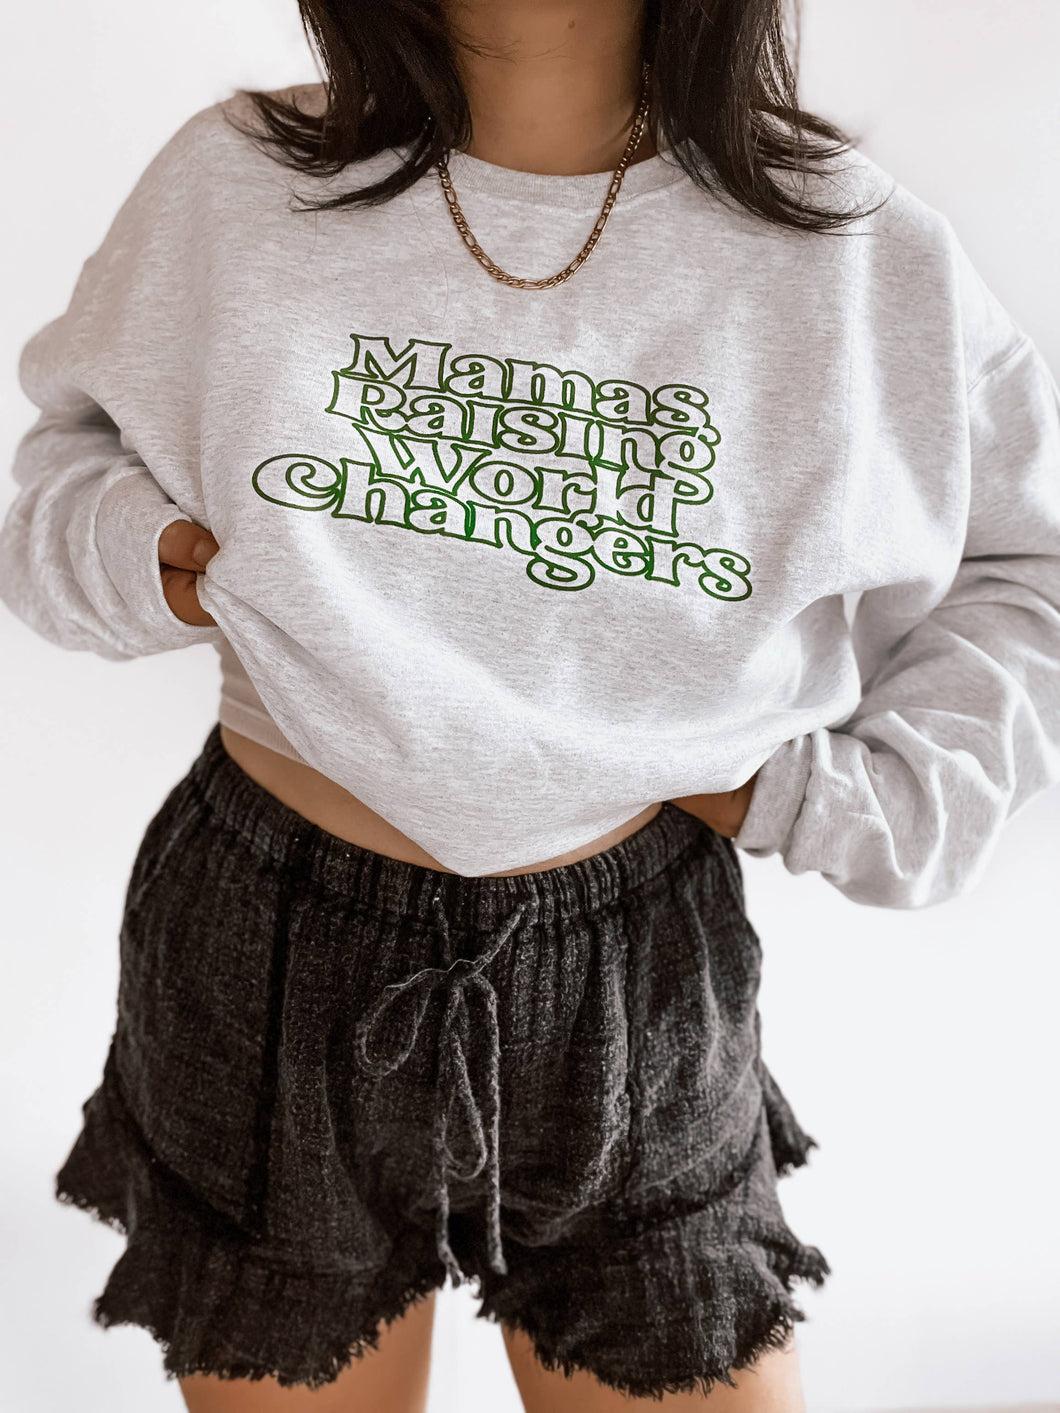 MAMAS RISING WORLD CHANGERS PULLOVER